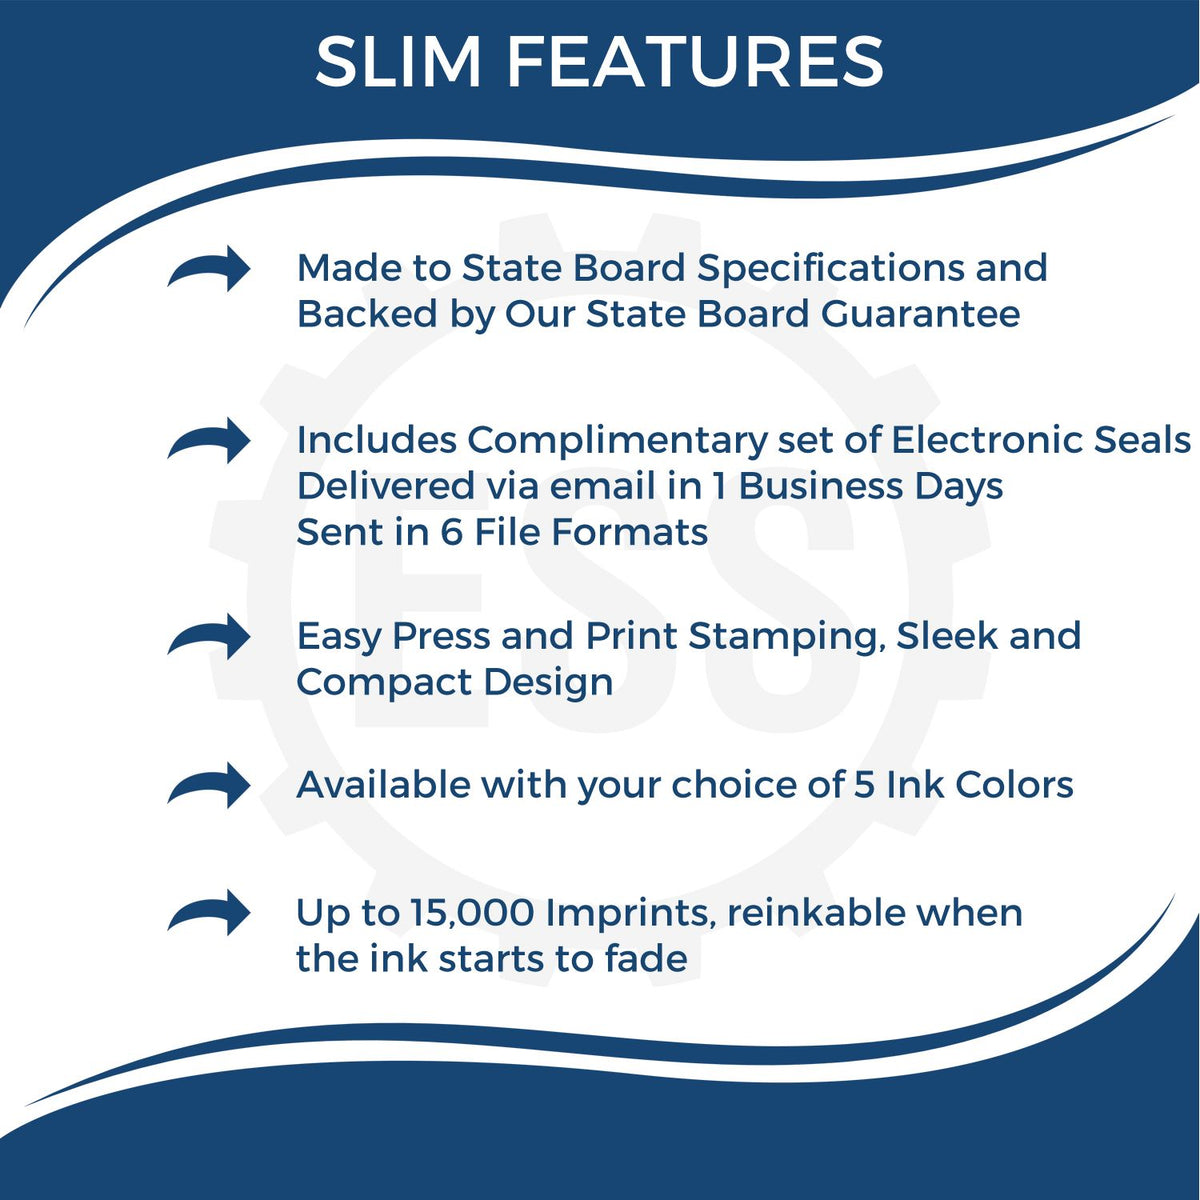 A picture of an infographic highlighting the selling points for the Slim Pre-Inked Florida Landscape Architect Seal Stamp